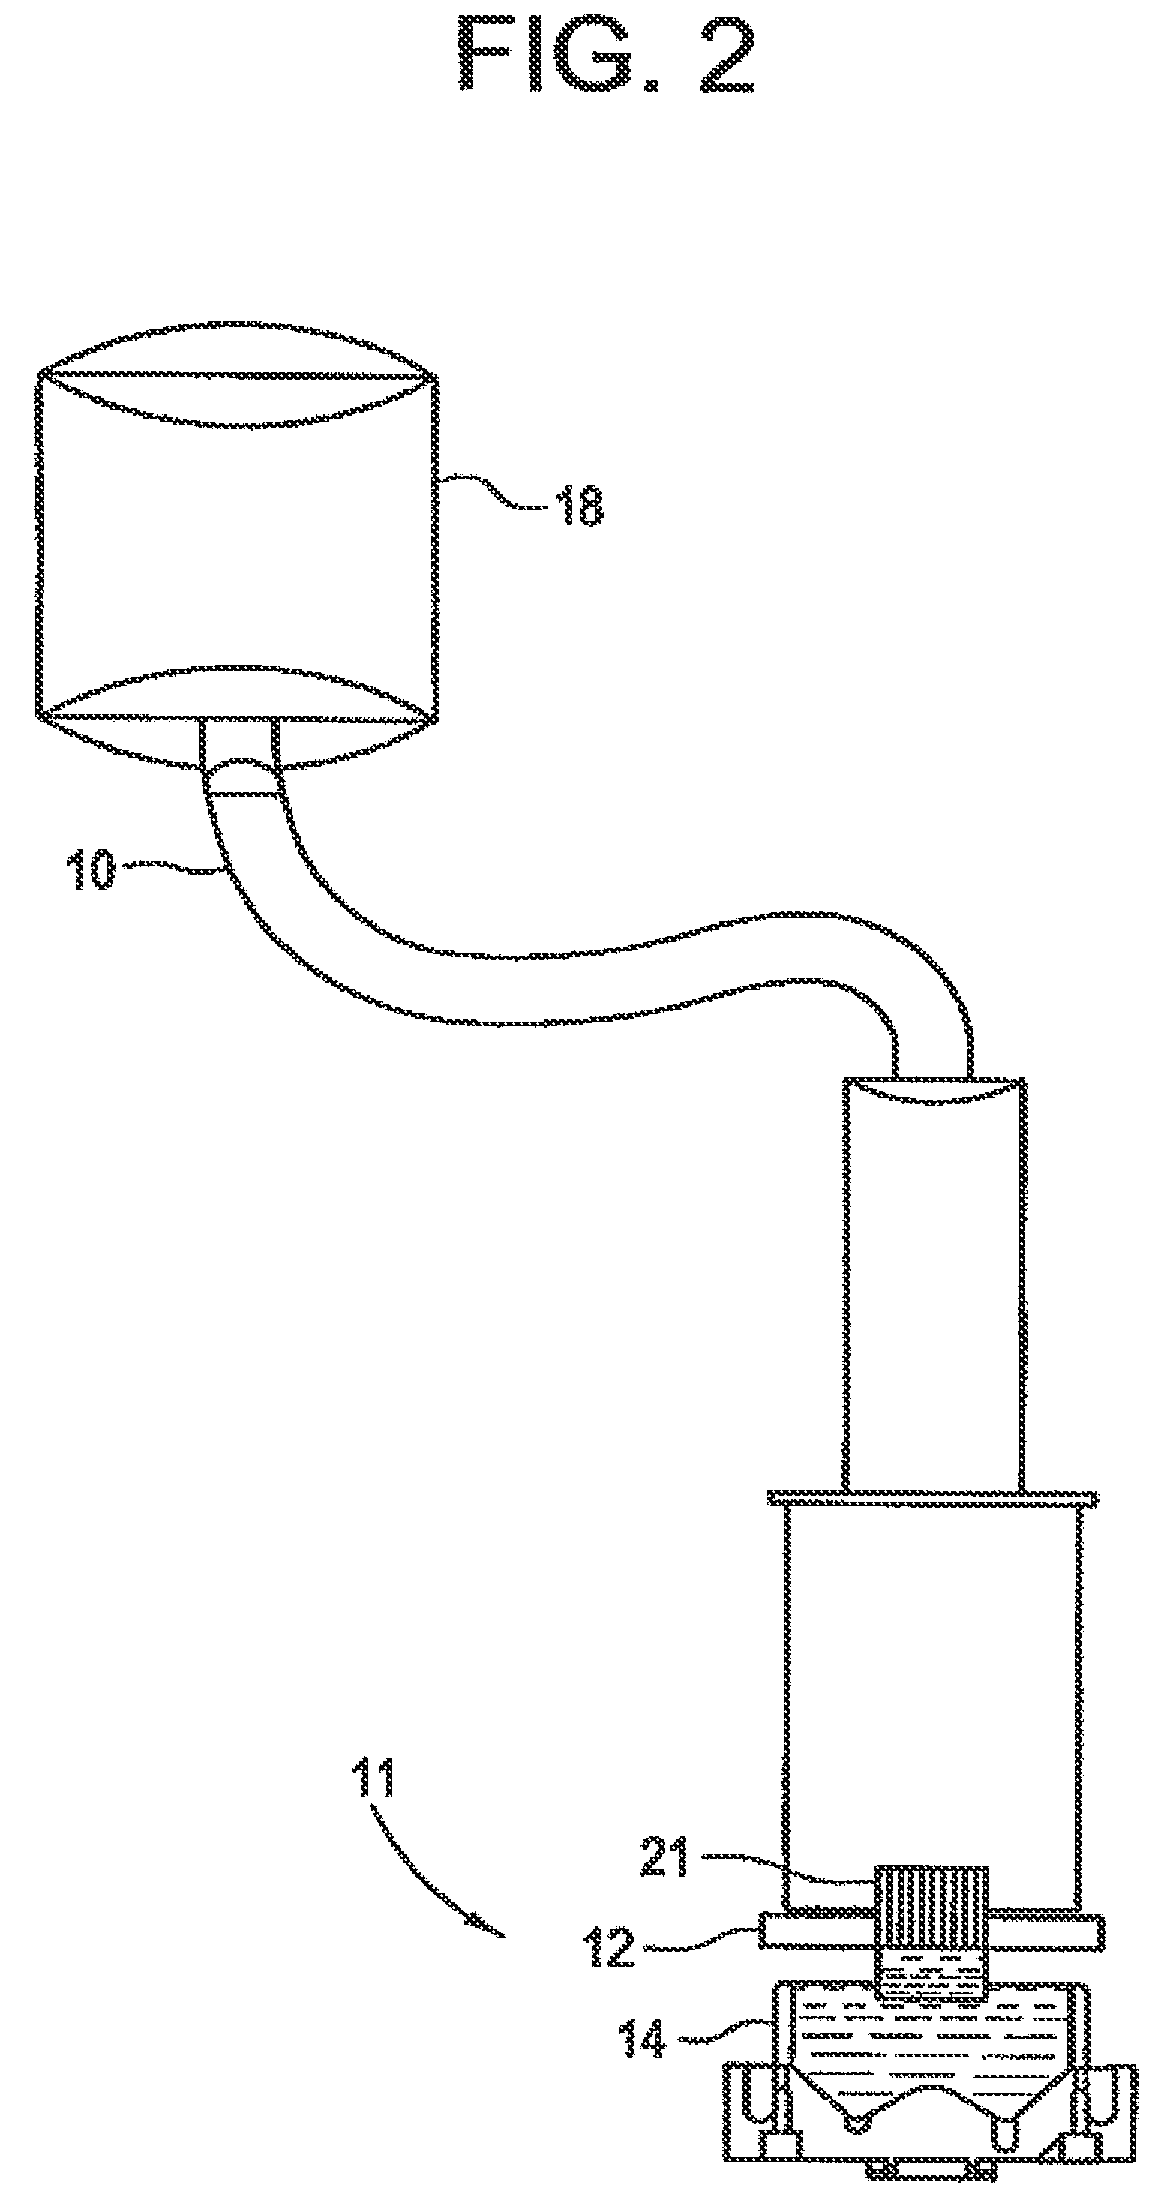 Method for catalyst coating of a substrate